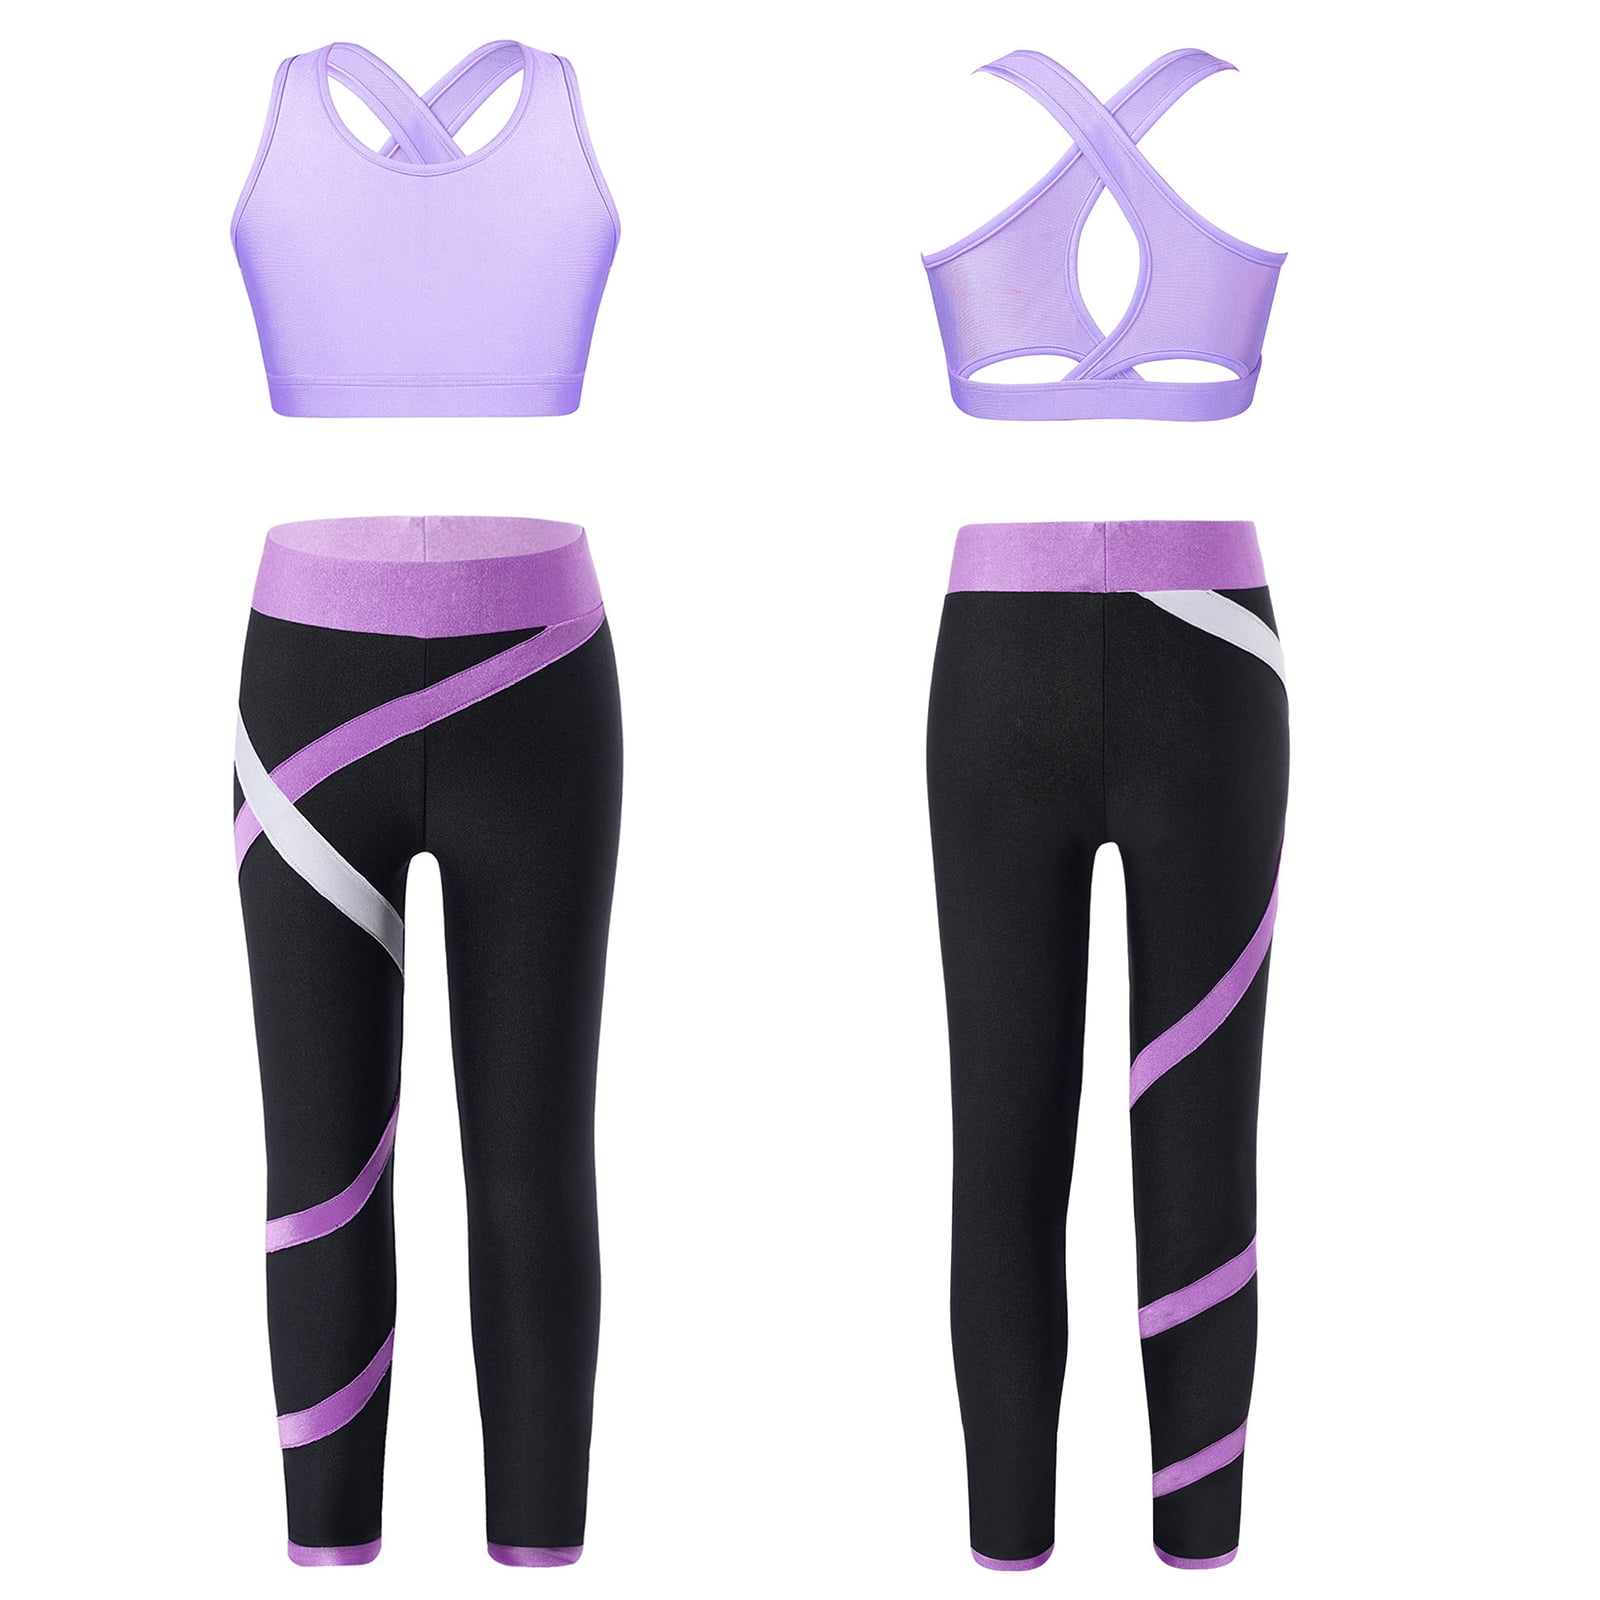 CHICTRY Kids' Girls' 2 Piece Activewear set Strappy Sport Bra and Booty  Short for Dancing Tumbling Athletic Gymnastics